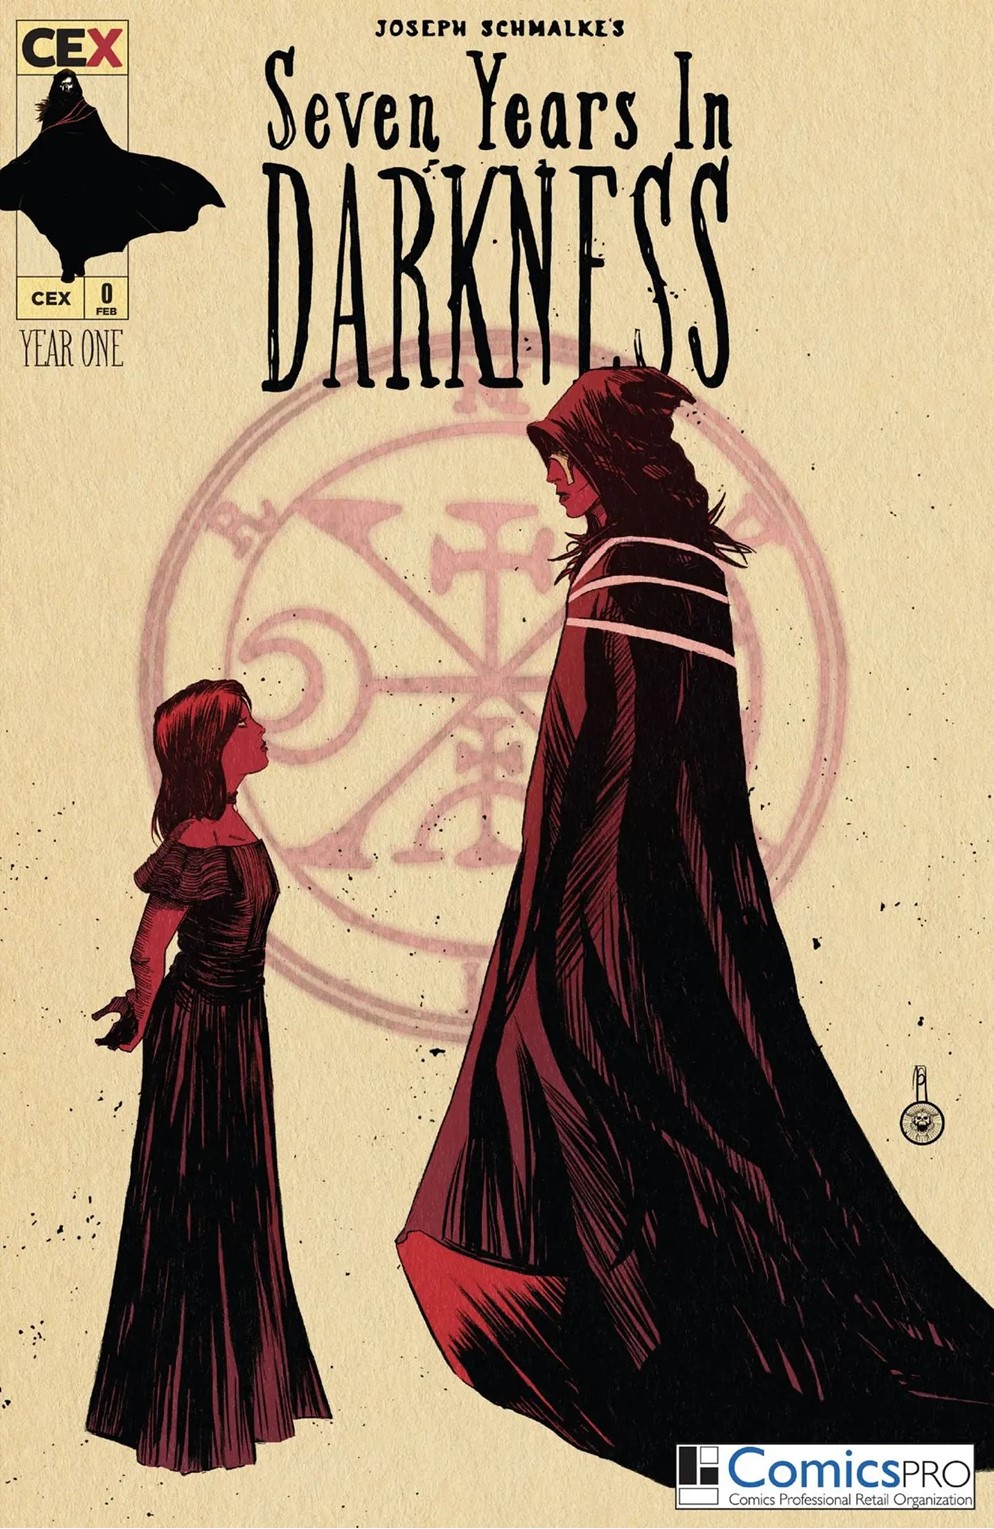 Seven Years In Darkness #1 Comics Pro 2023 Variant